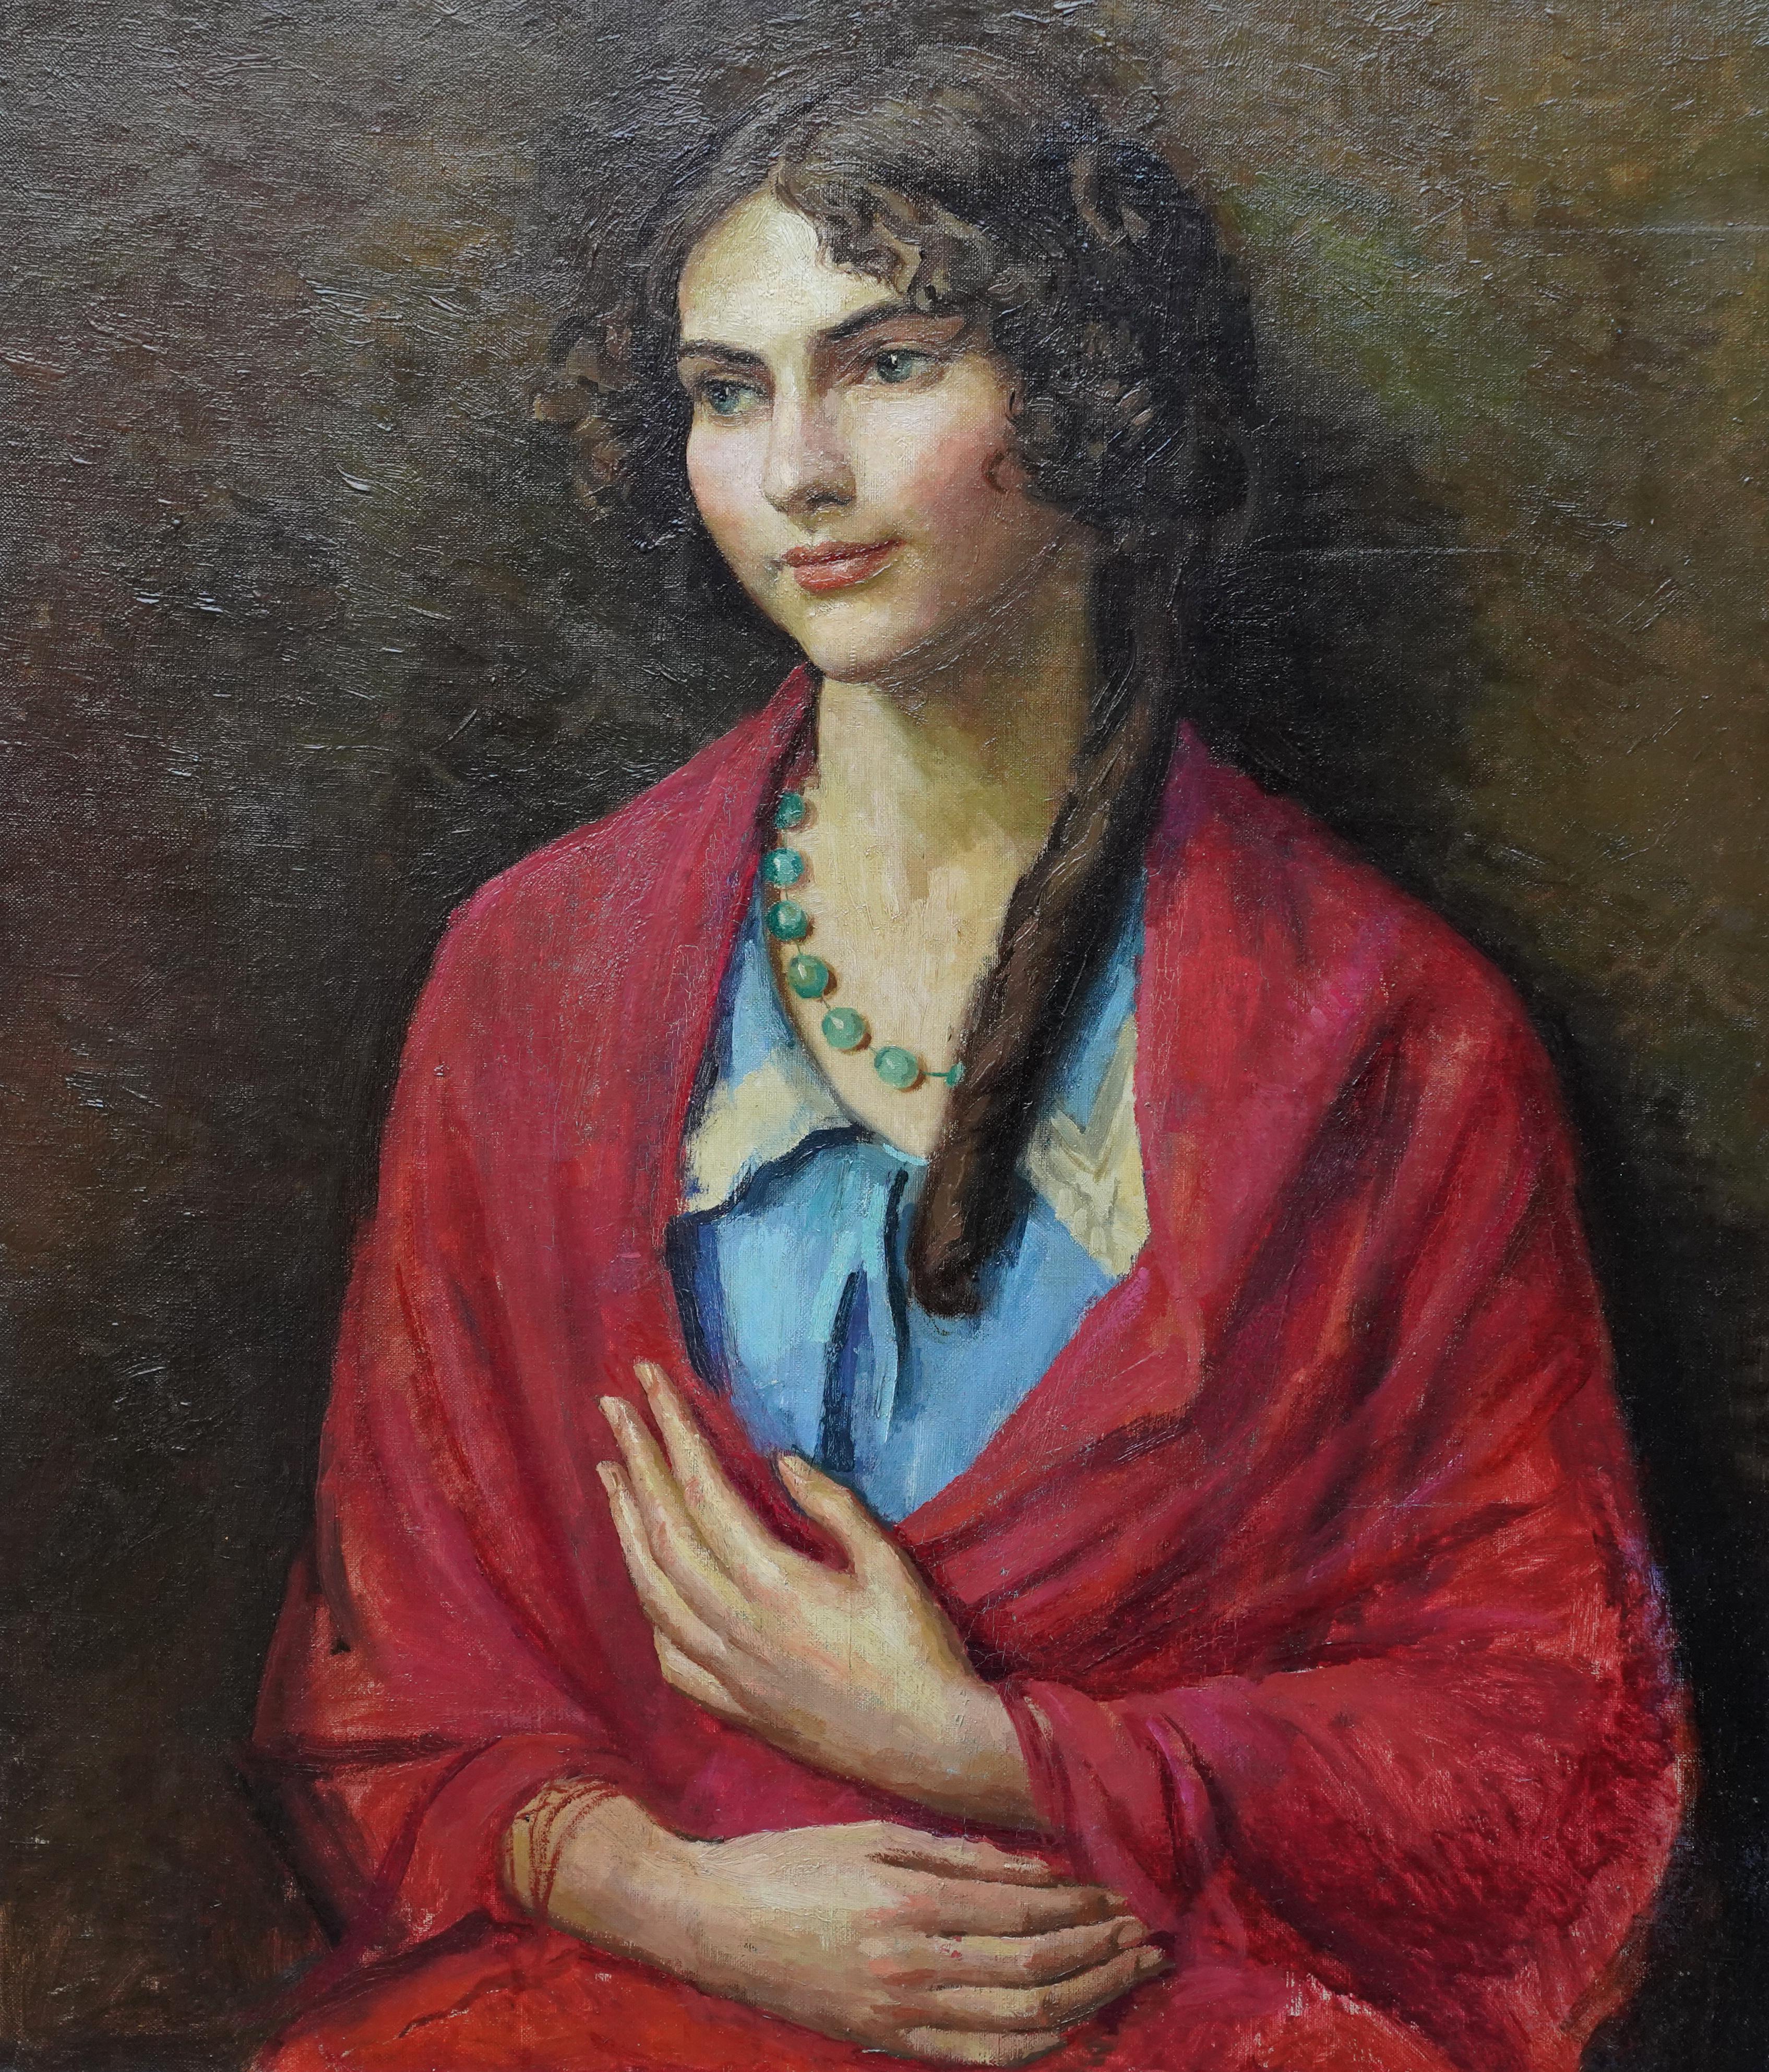 Portrait of Woman in Red Shawl - Nudes verso - British 1940's art oil painting - Painting by Lionel Ellis